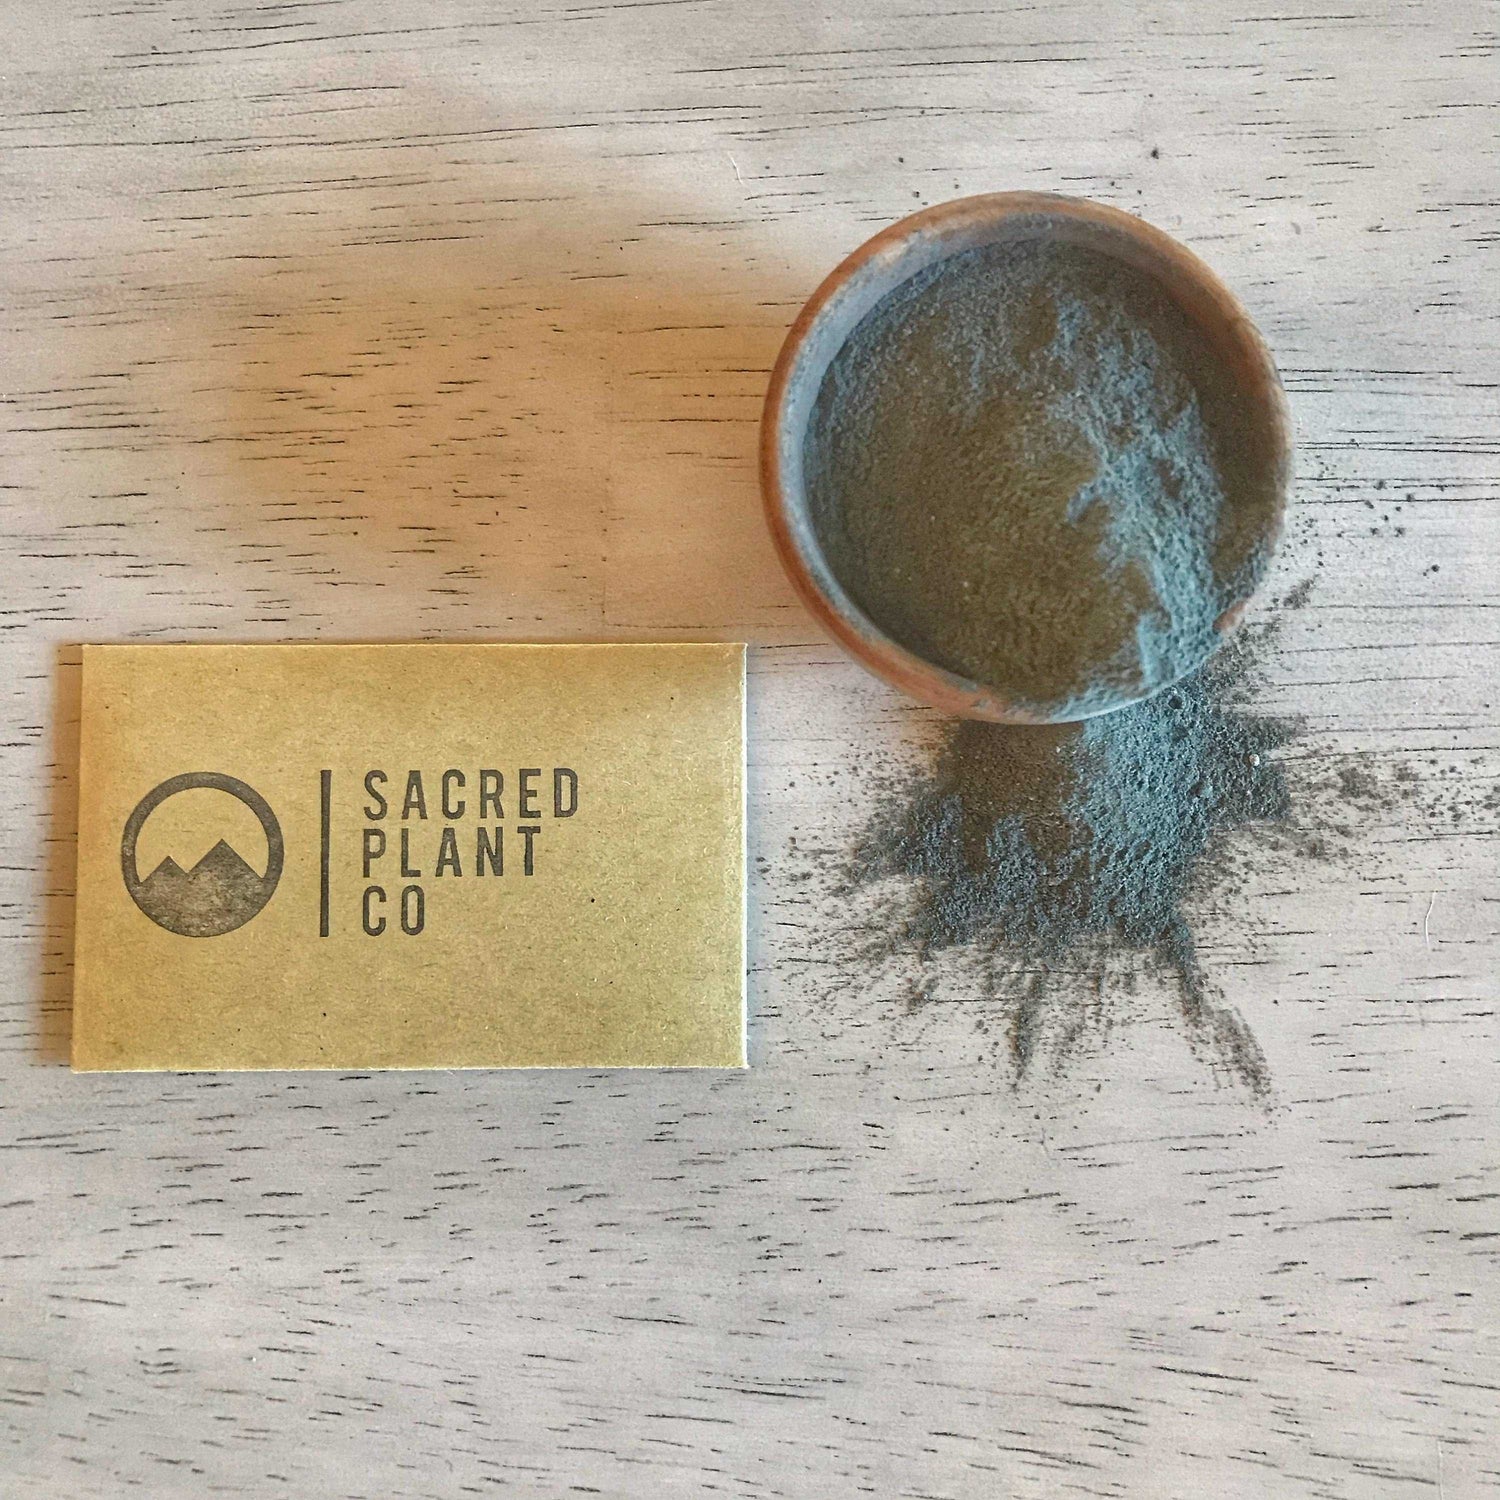 Golden business card for Sacred Plant Co lies next to a wooden bowl of their Ayurvedic face mask powder on a white wooden table, highlighting the natural, earthy ingredients of the product.Plant Co is partially covered by the leaves, and a small wooden bowl rests in the background.